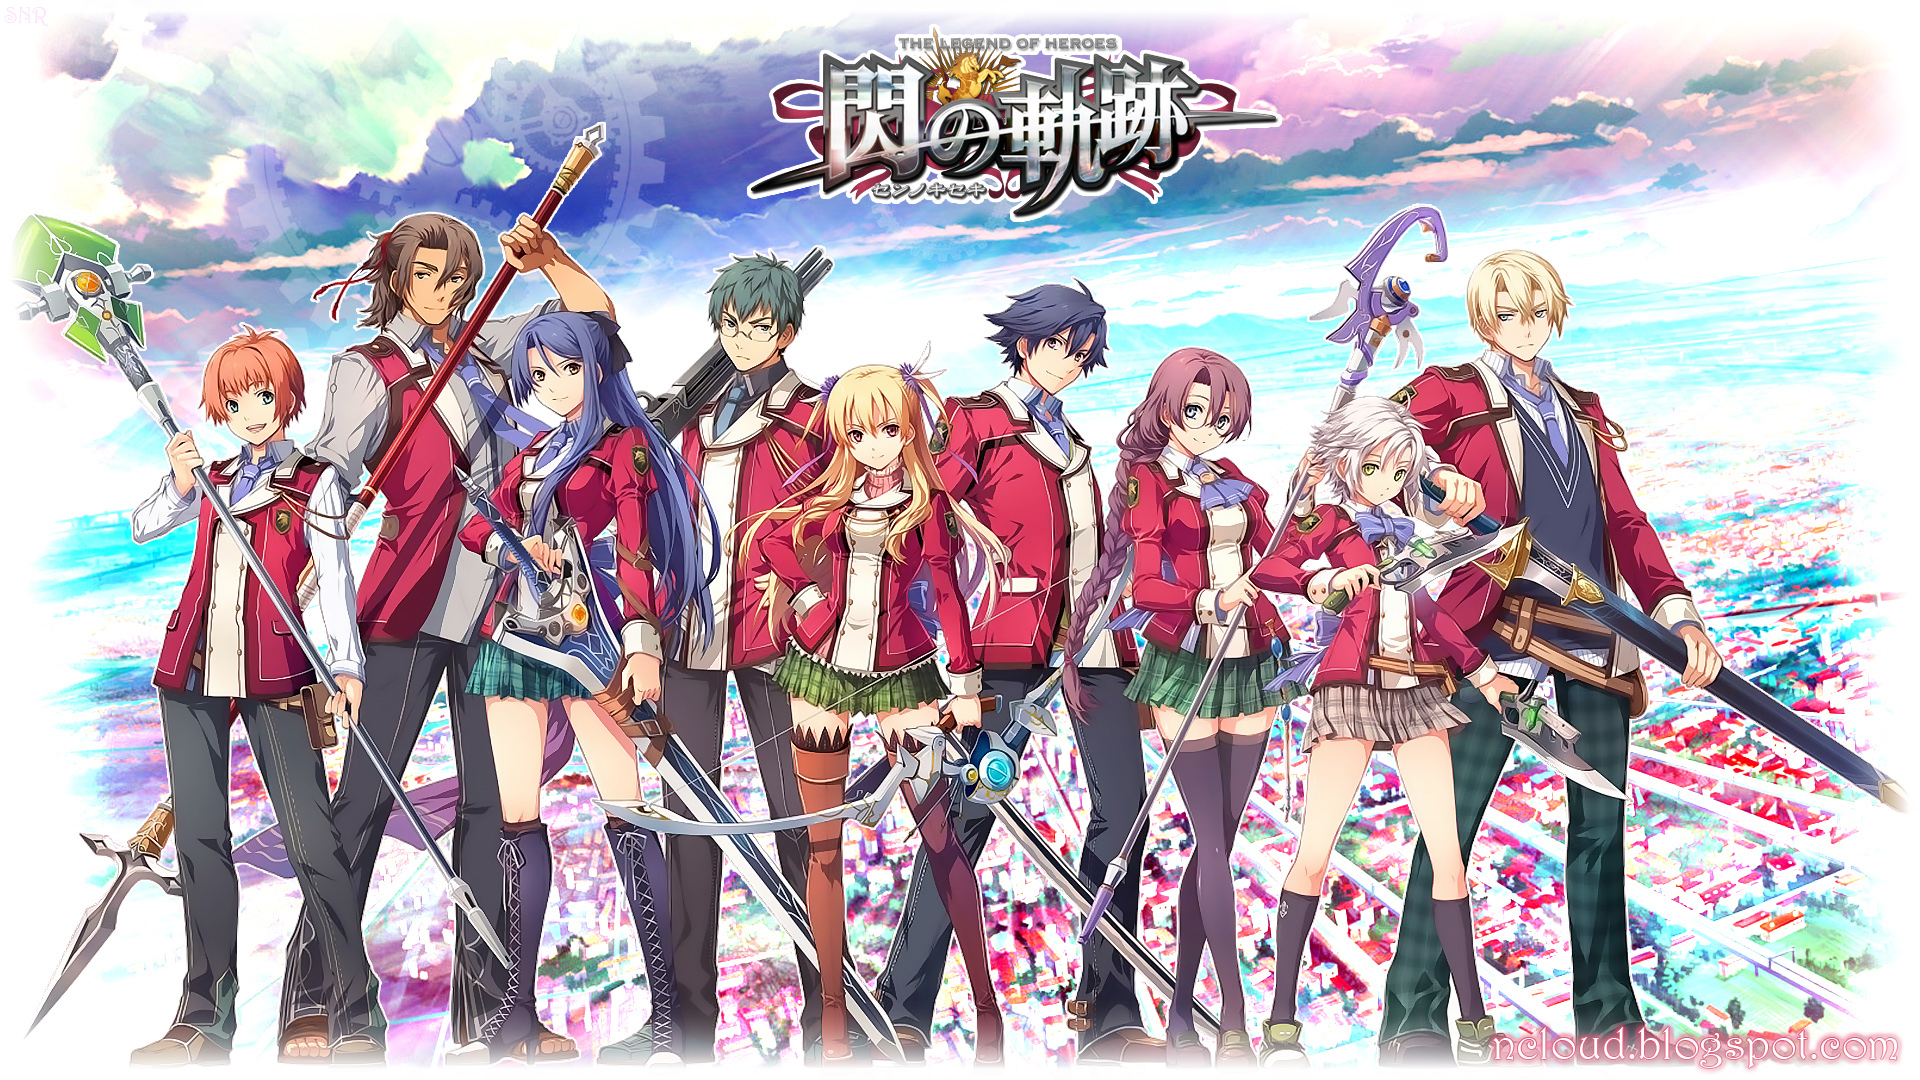 im completely new to legend of heroes so ill be reviewing sen no kiseki snk more as an outsider this episode is the first on psvita and the first to